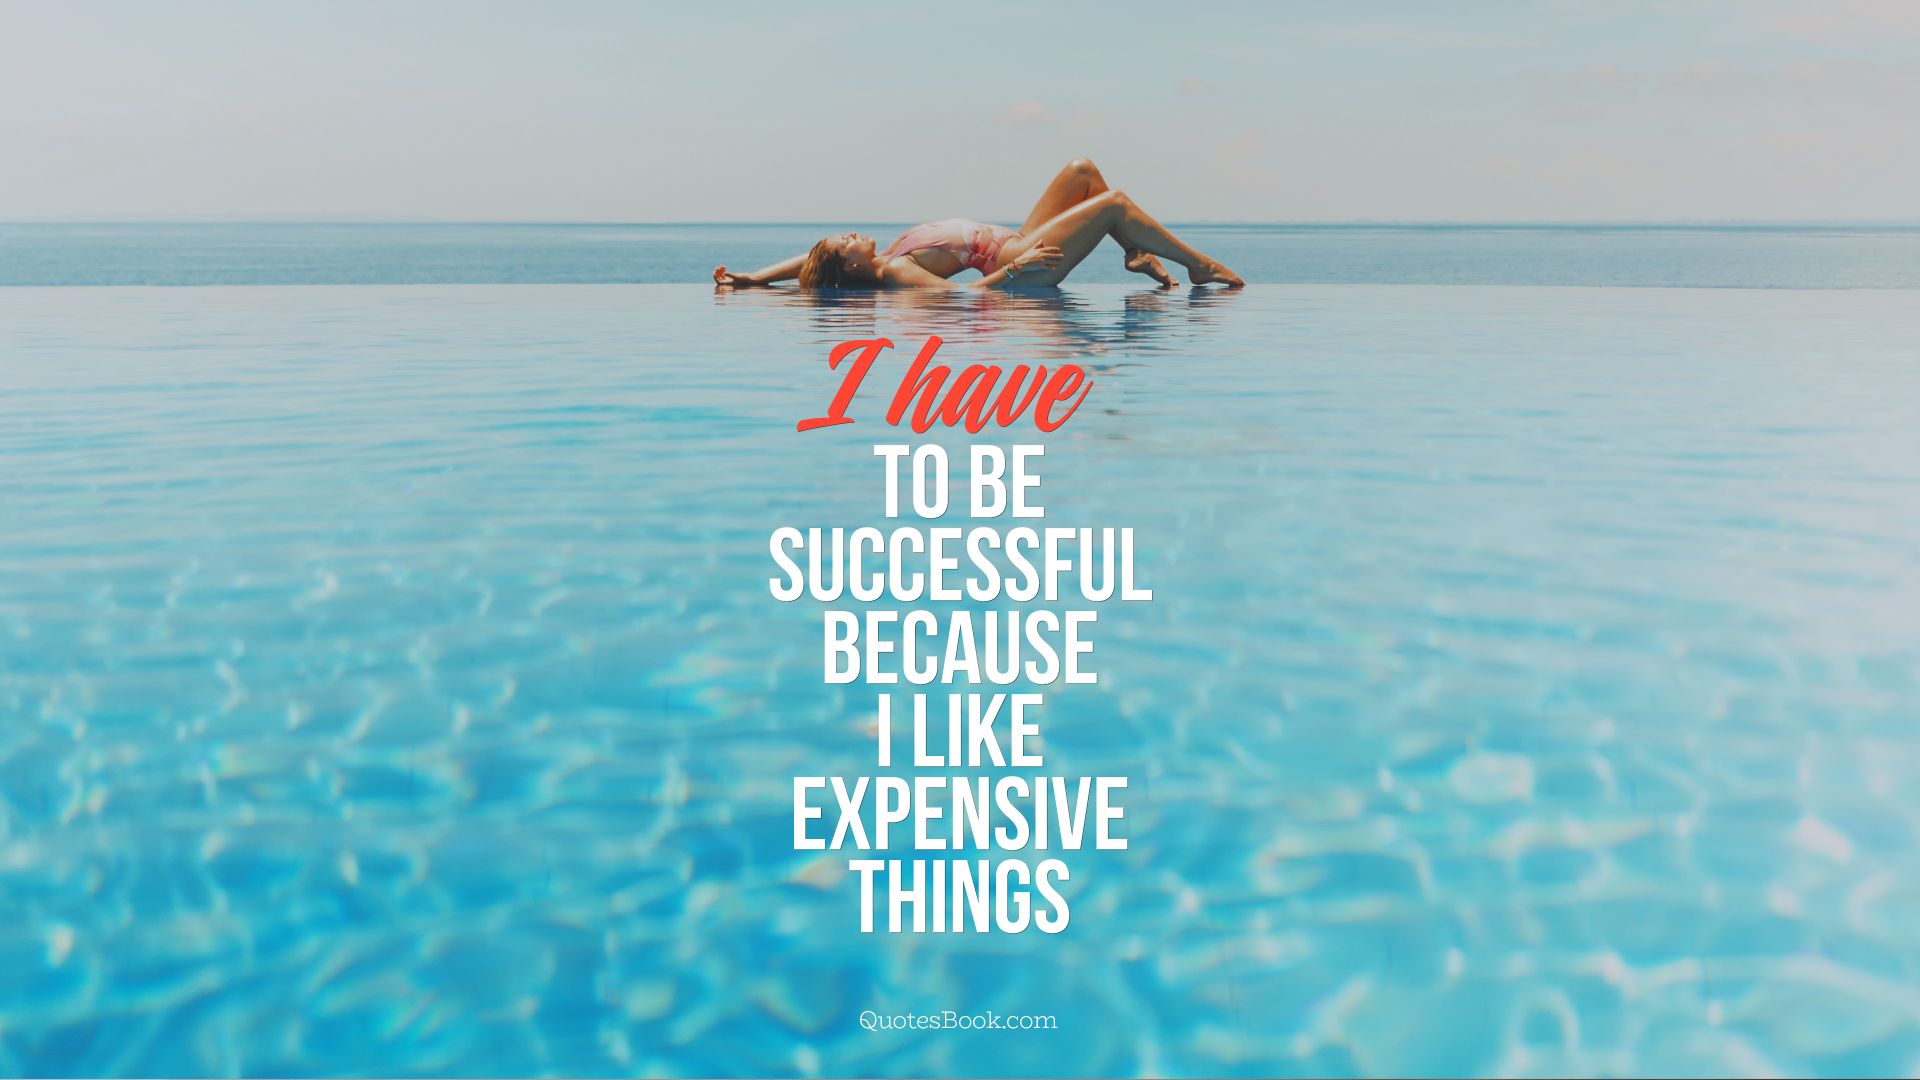 I have to be successful because I like expensive things